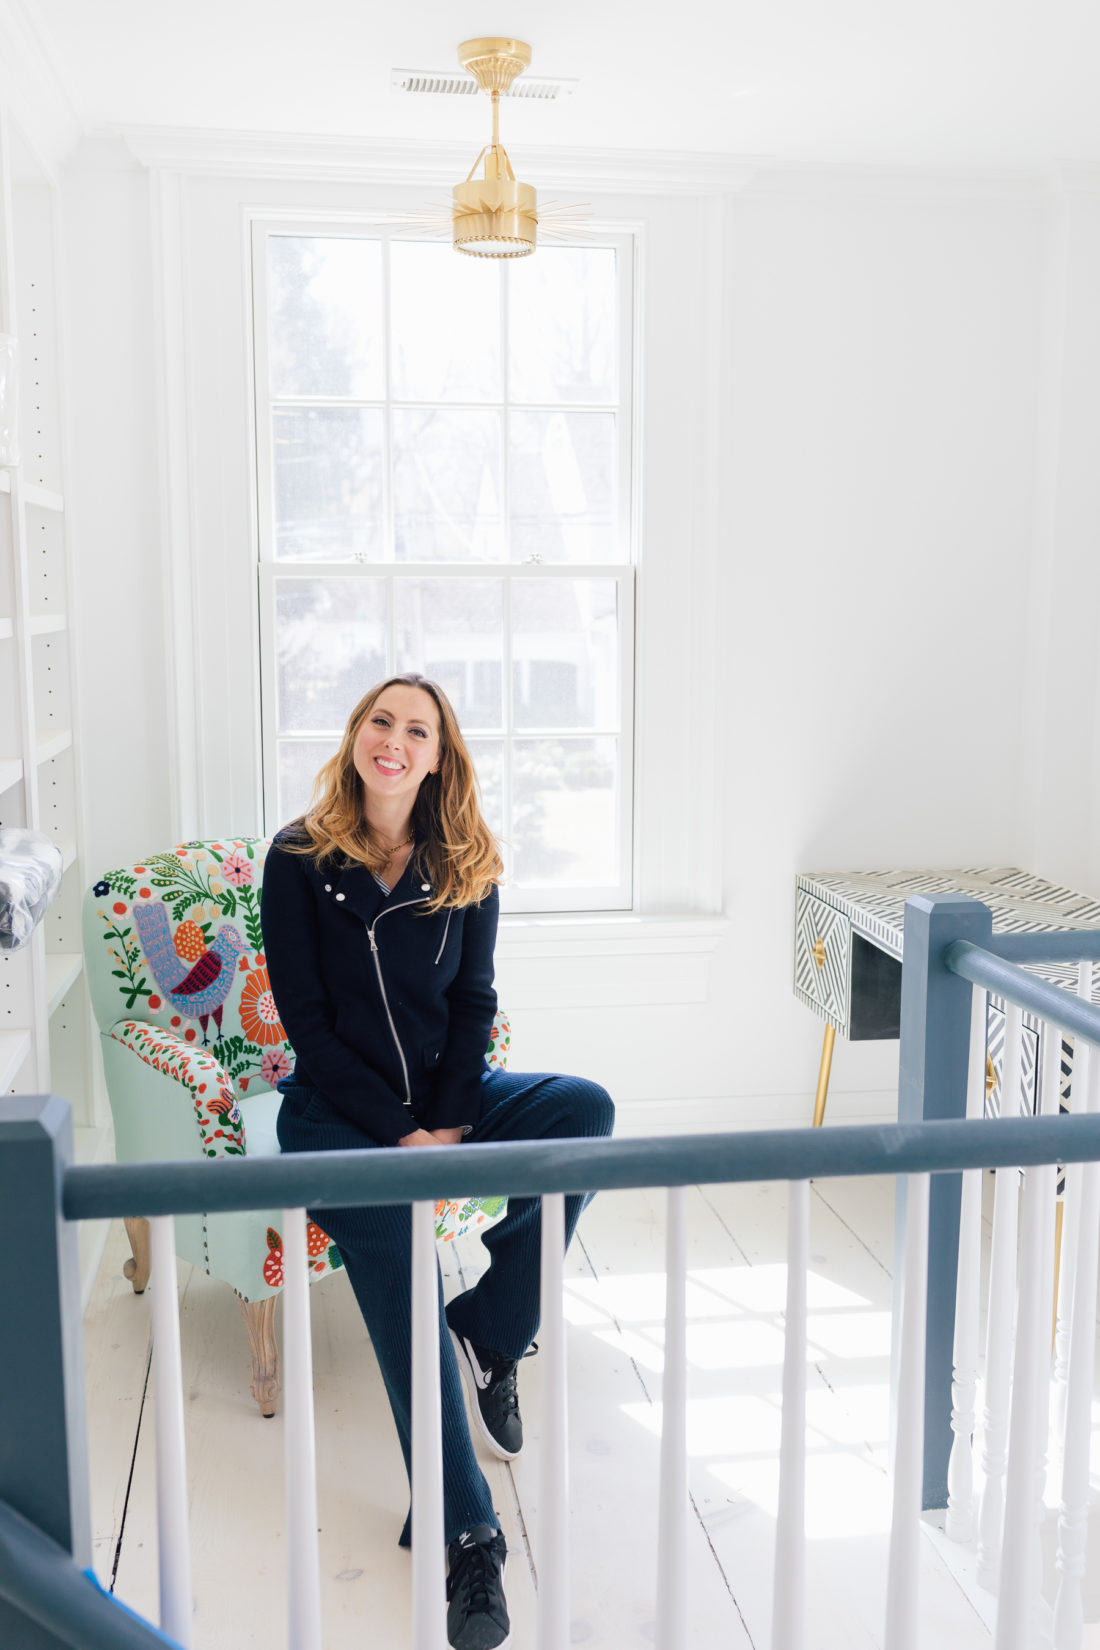 Eva Amurri Martino shares her finished renovations at her home in Connecticut